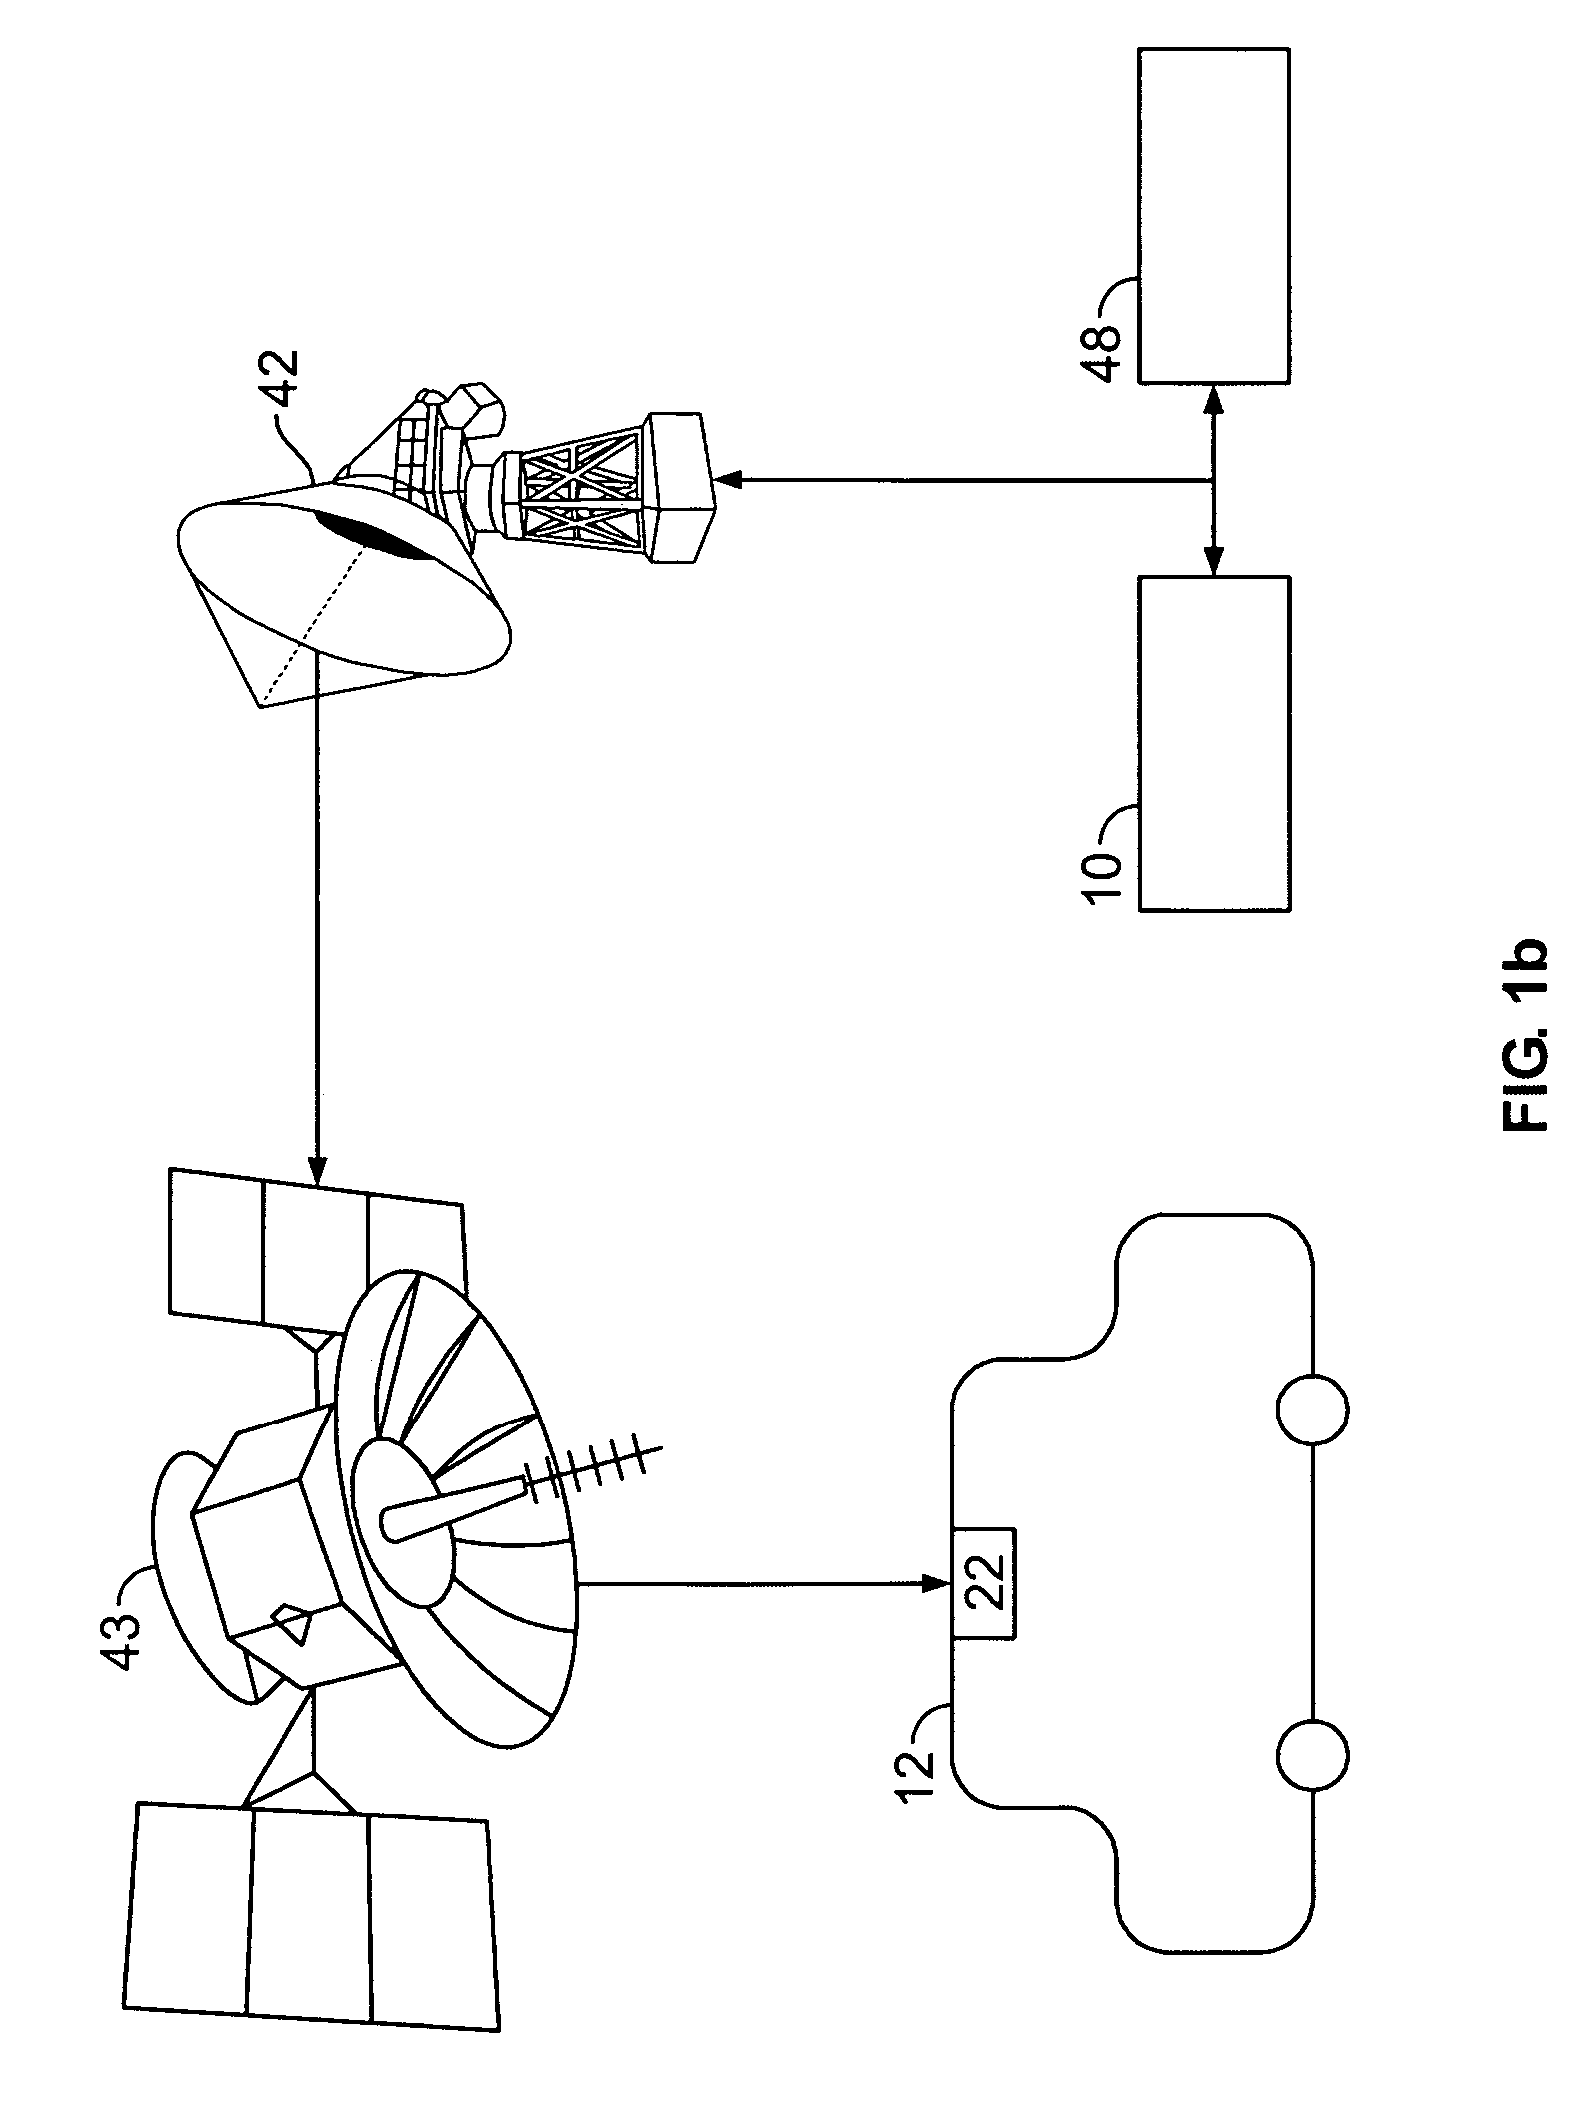 Method and system for remote immobilization of vehicles